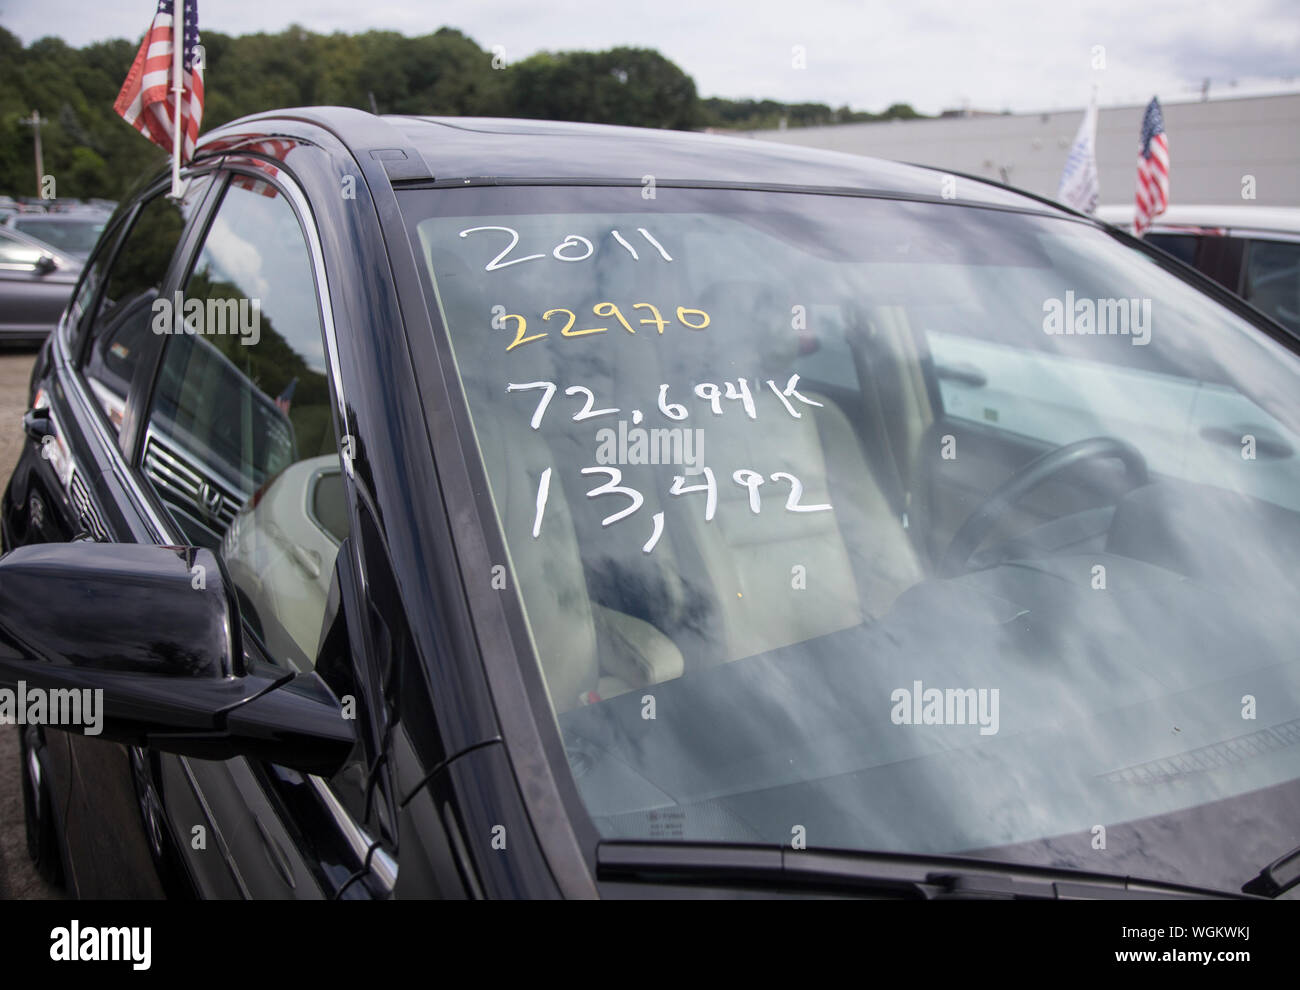 Price of a used car on the windshield of Honda automobiles Stock Photo